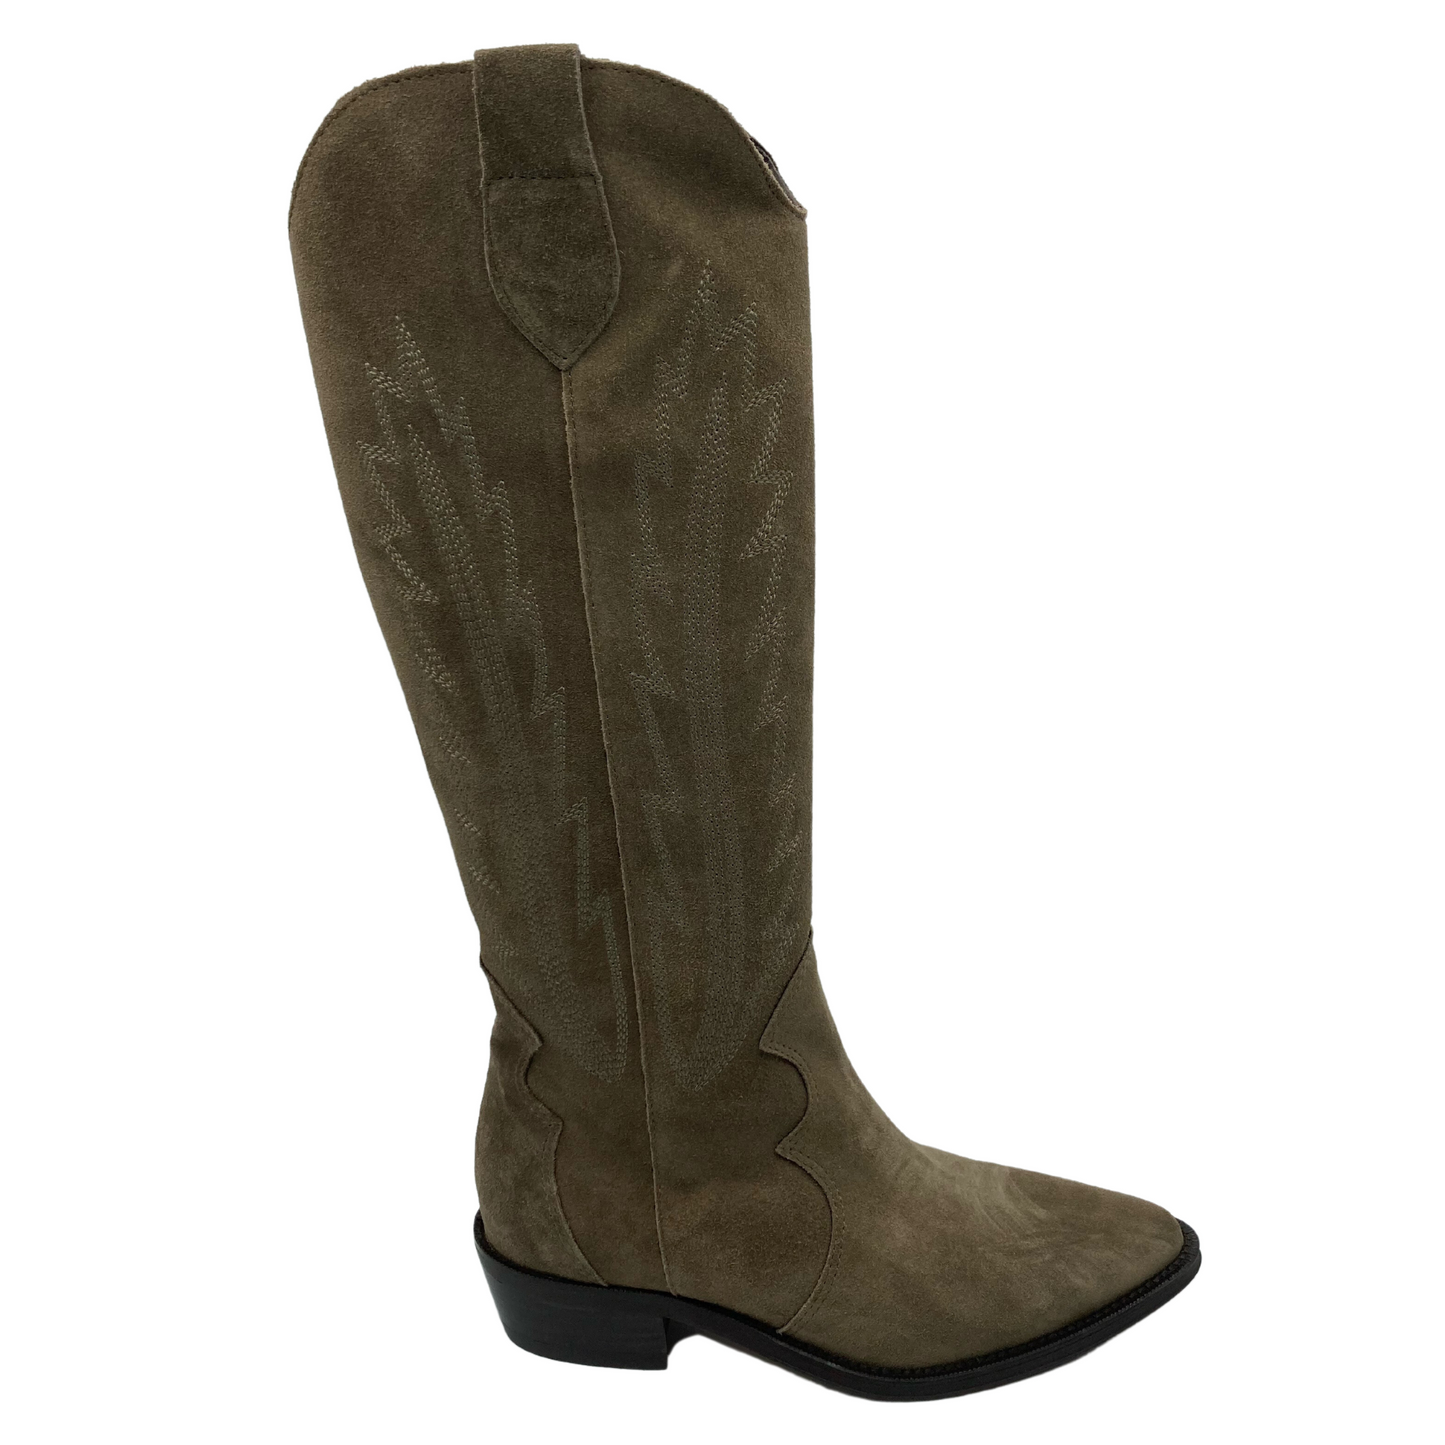 Right facing view of sand coloured tall cowboy boot with low heel